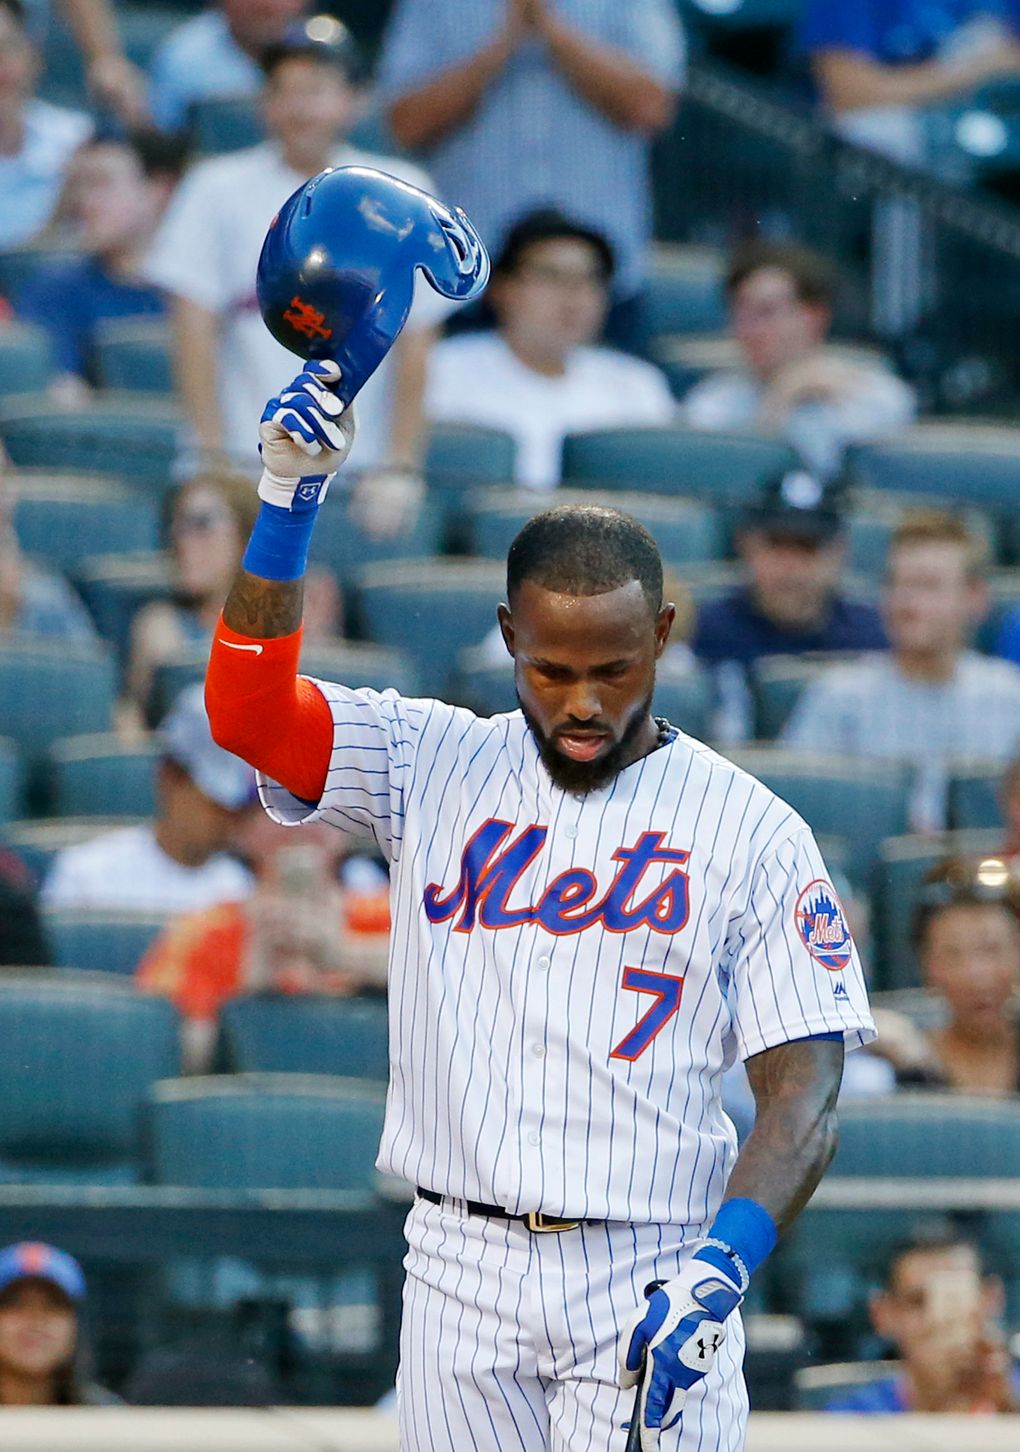 Reyes cheered in 1st minor league game since rejoining Mets